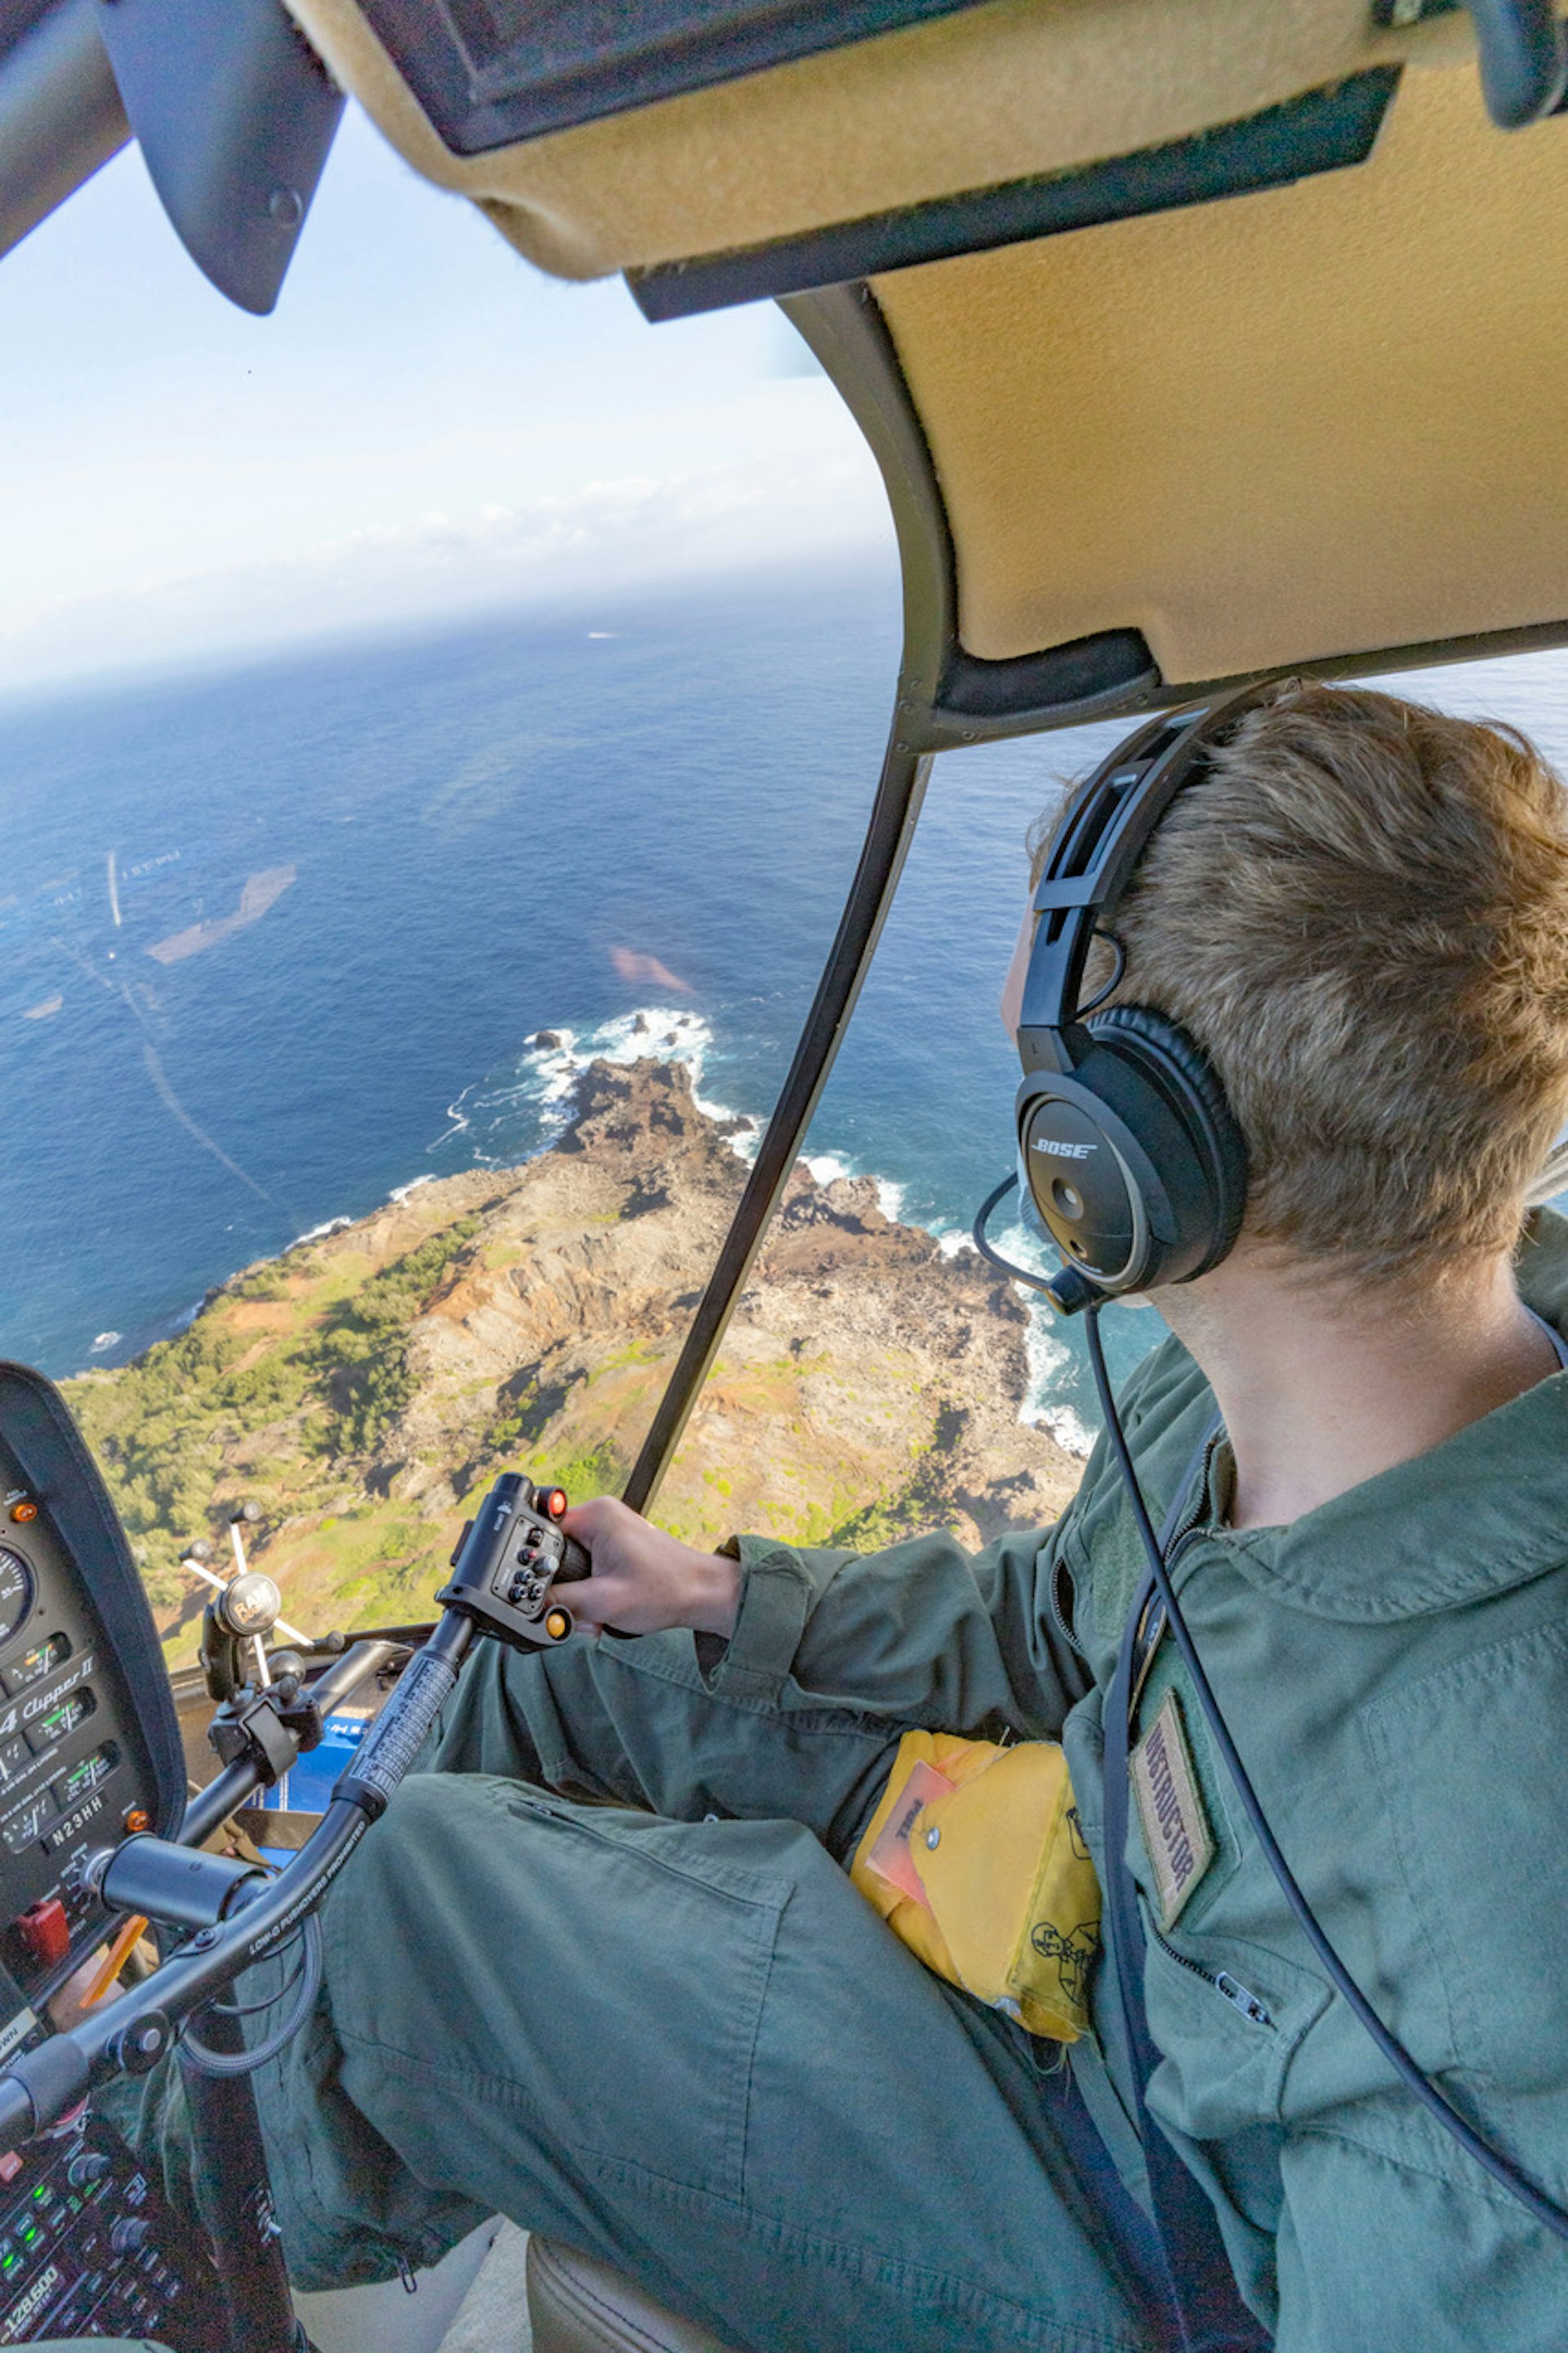 Inside the cockpit as a man flies a helicopter over a rocky coast